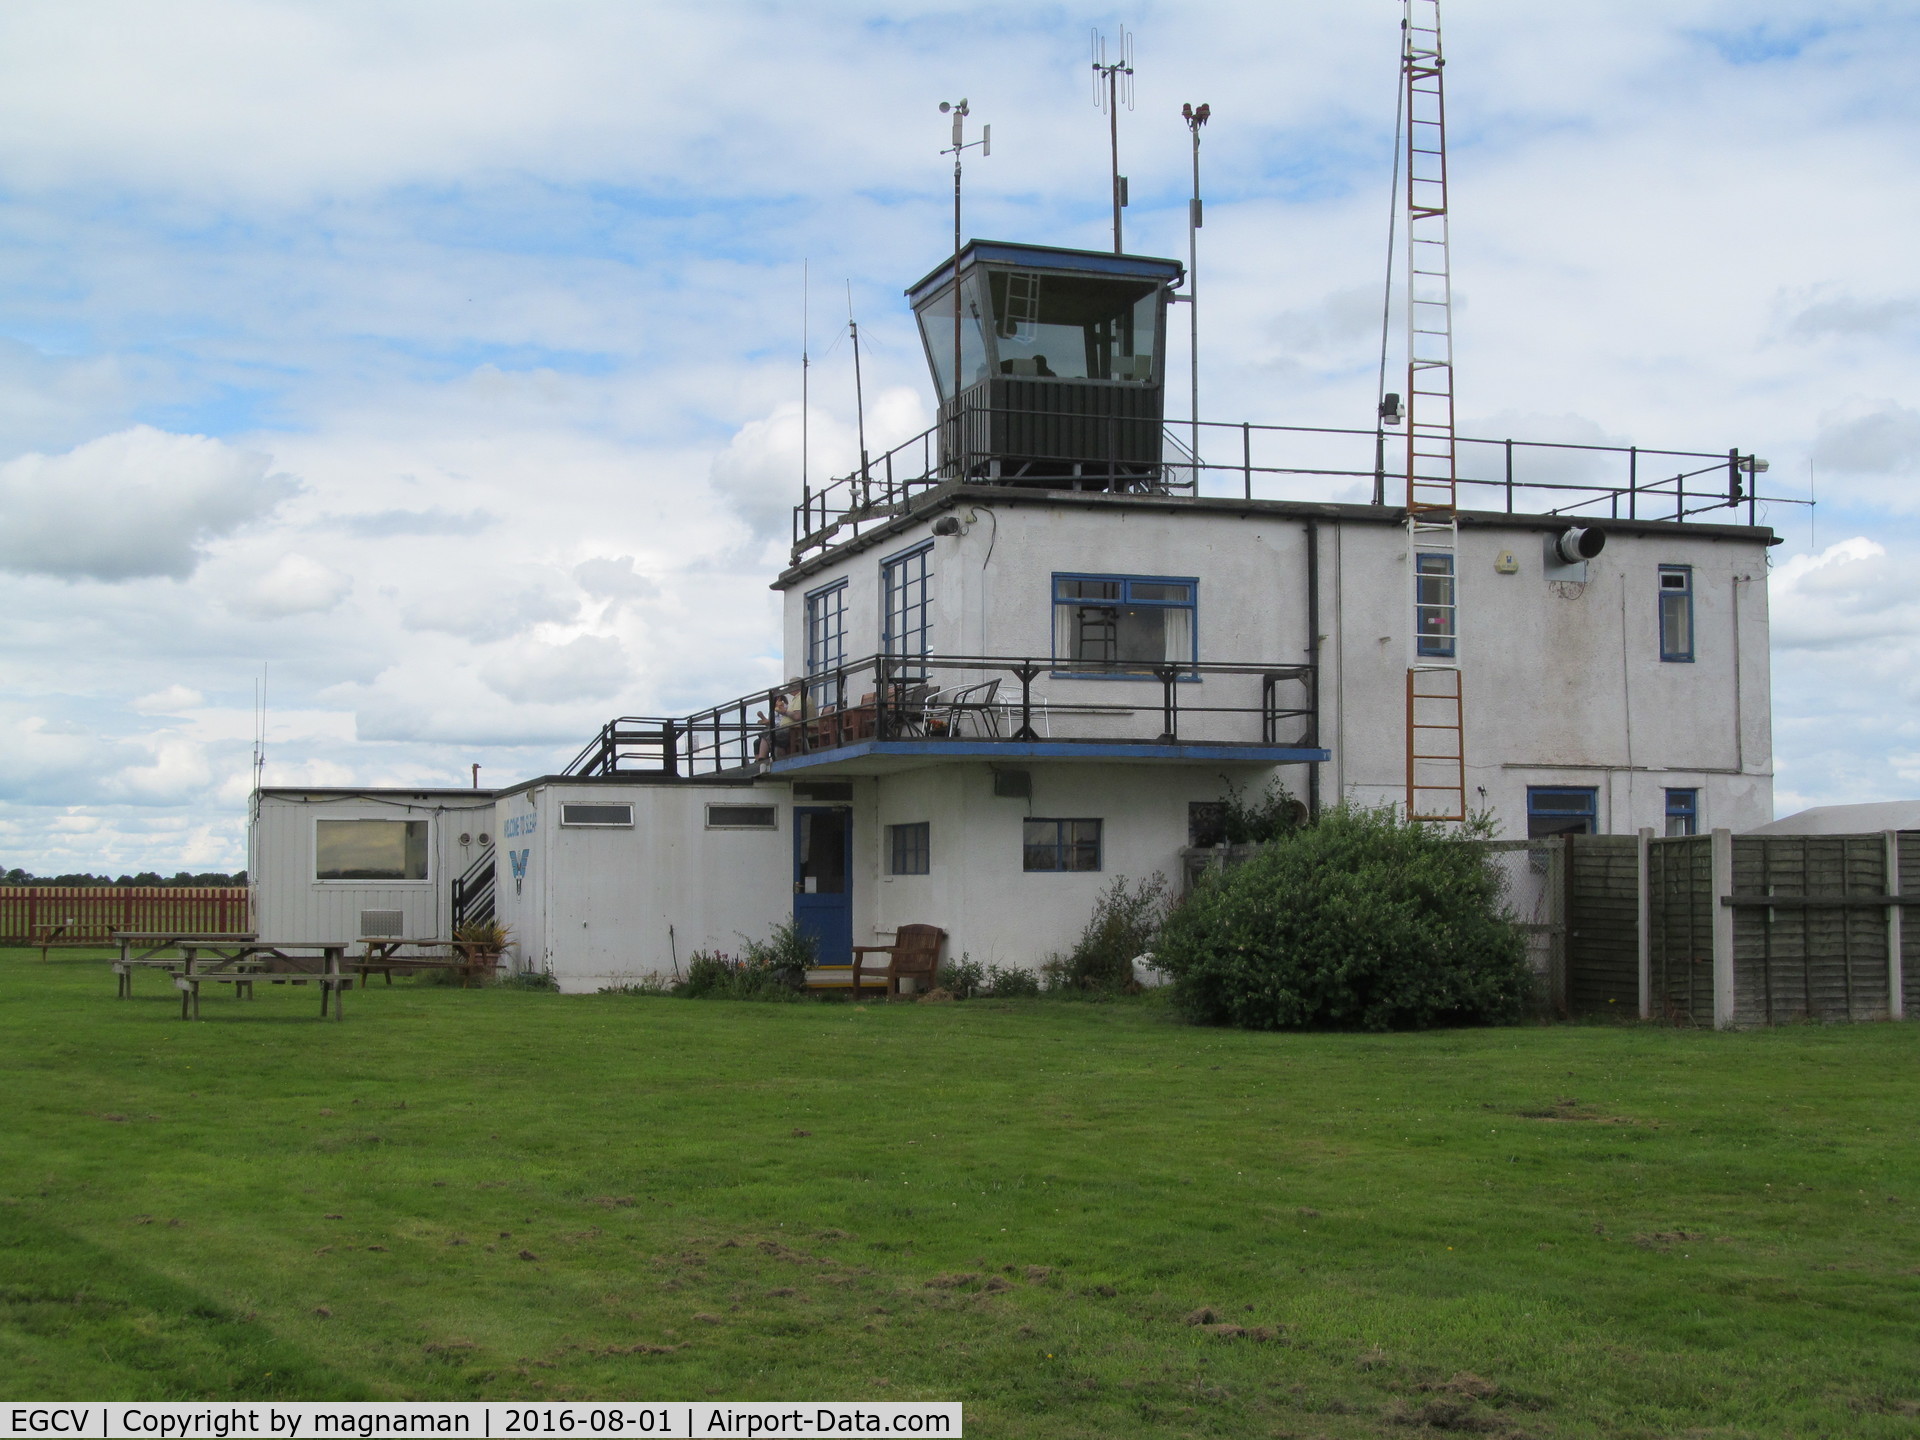 Sleap Airfield Airport, Shrewsbury, England United Kingdom (EGCV) - control tower and clubhouse and café!